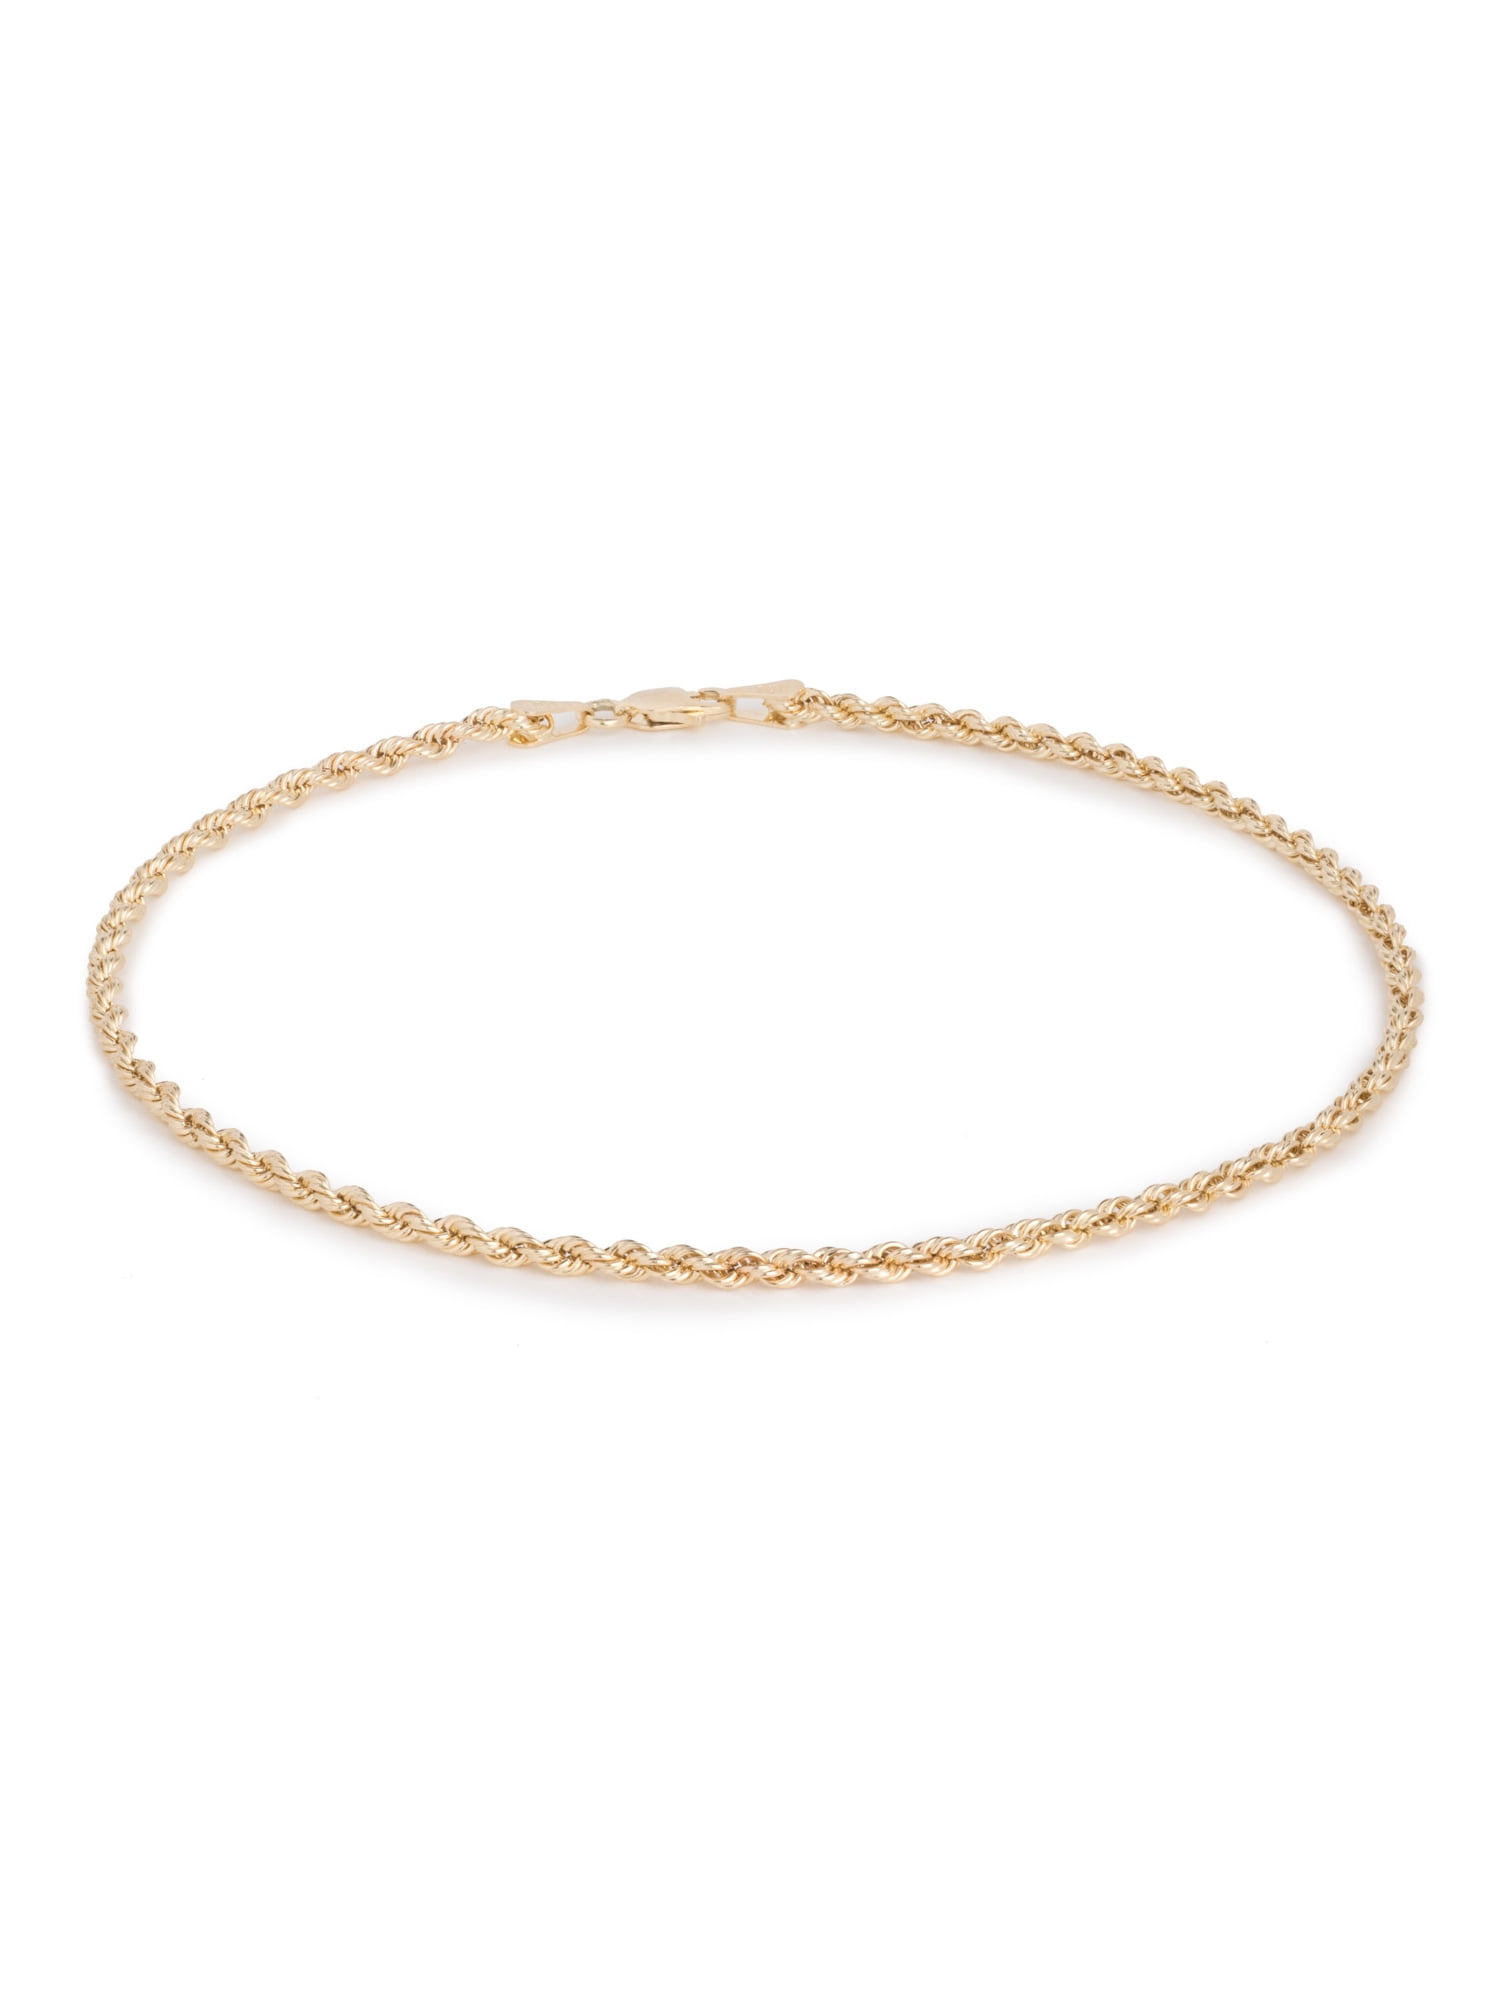 10k Yellow Gold Hollow Rope Chain Bracelet and Anklet for Men & Women, 2.5mm